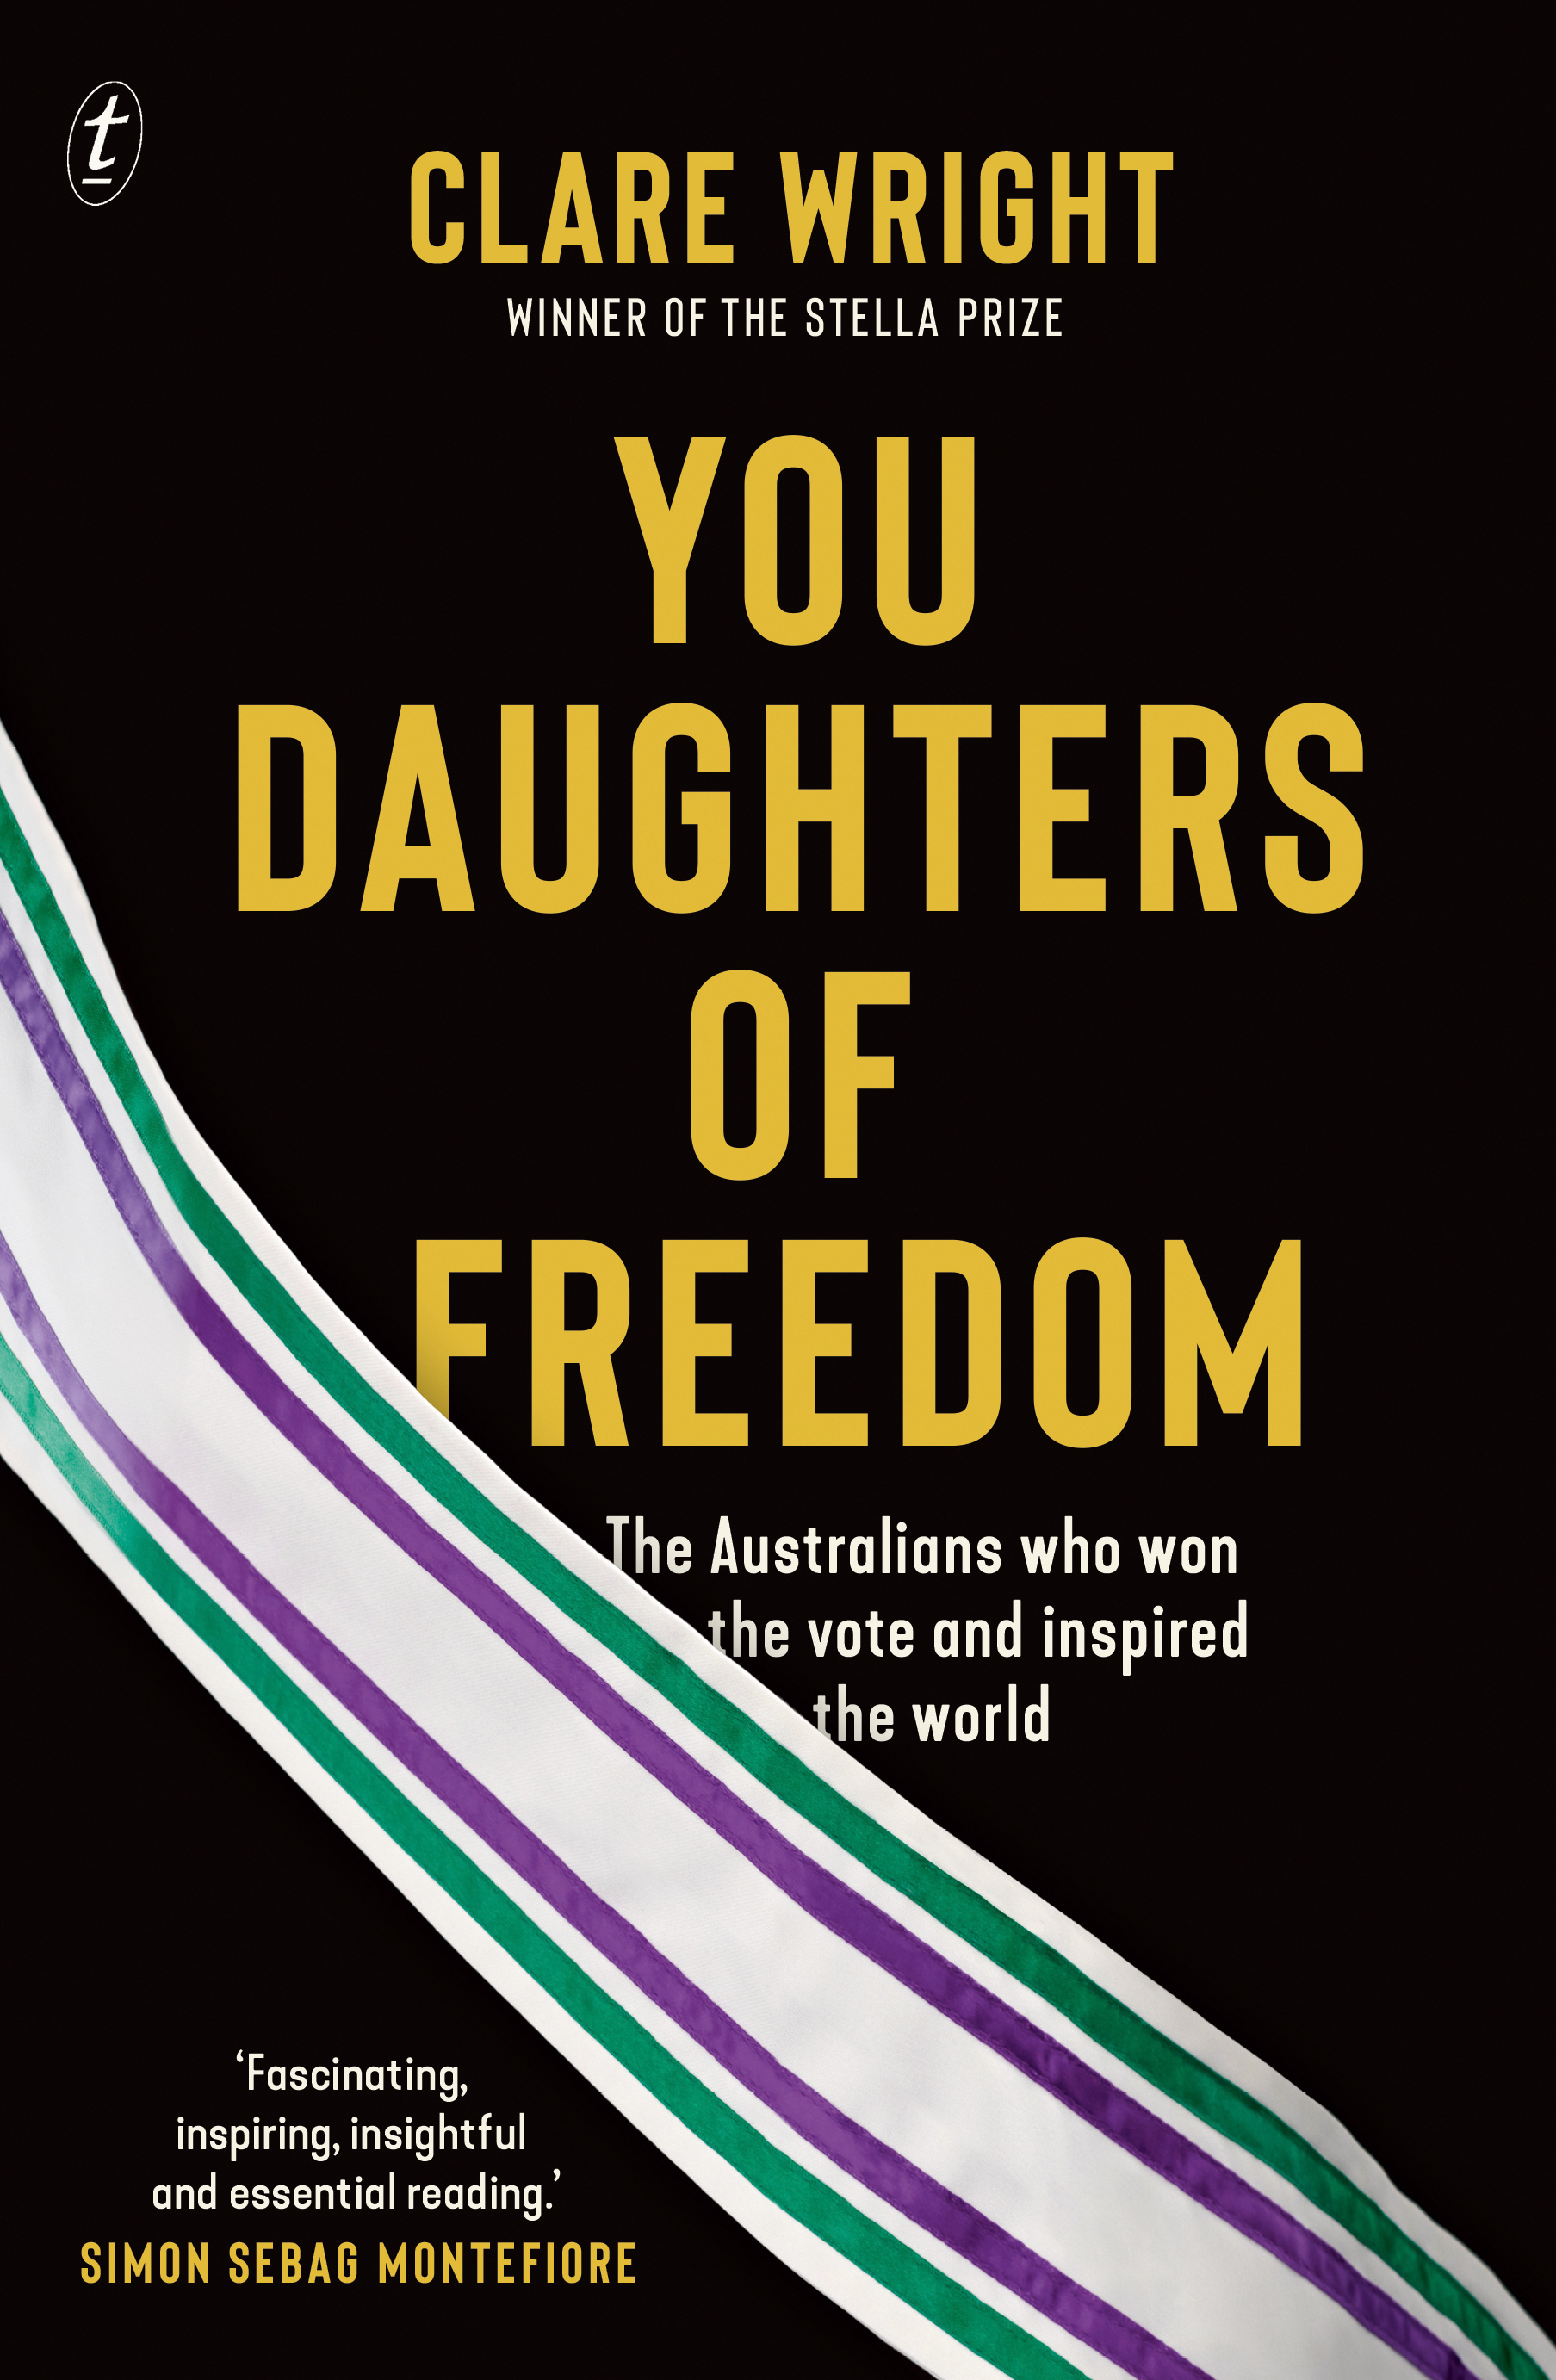 Image of a book cover: You Daughters of Freedom: The Australians Who Won the Vote and Inspired the World by Clare Wright (Text); cover shows a suffragette sash across a black background